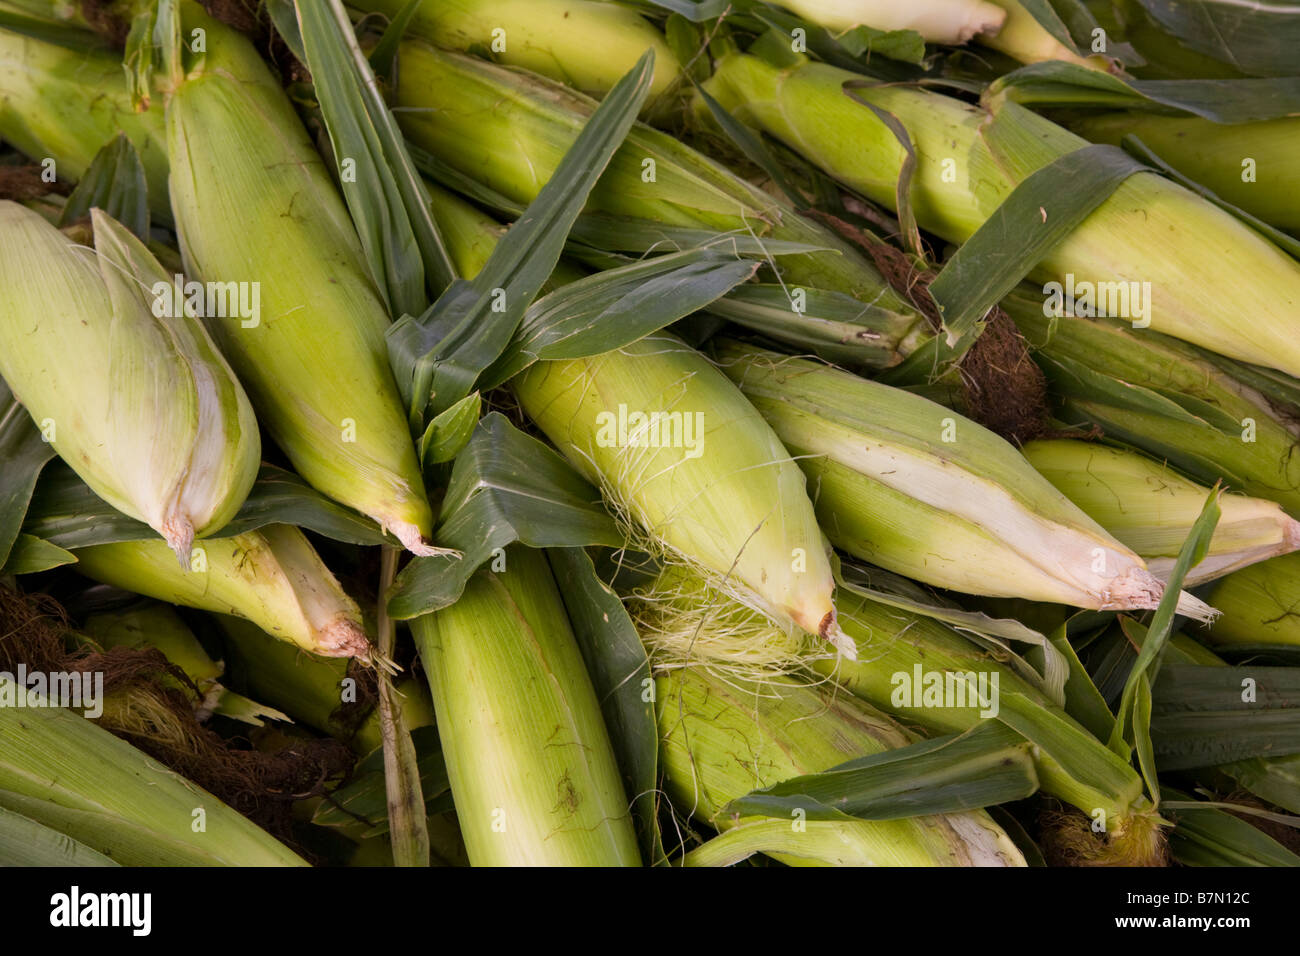 Corn in a pile at farmers market stand Stock Photo